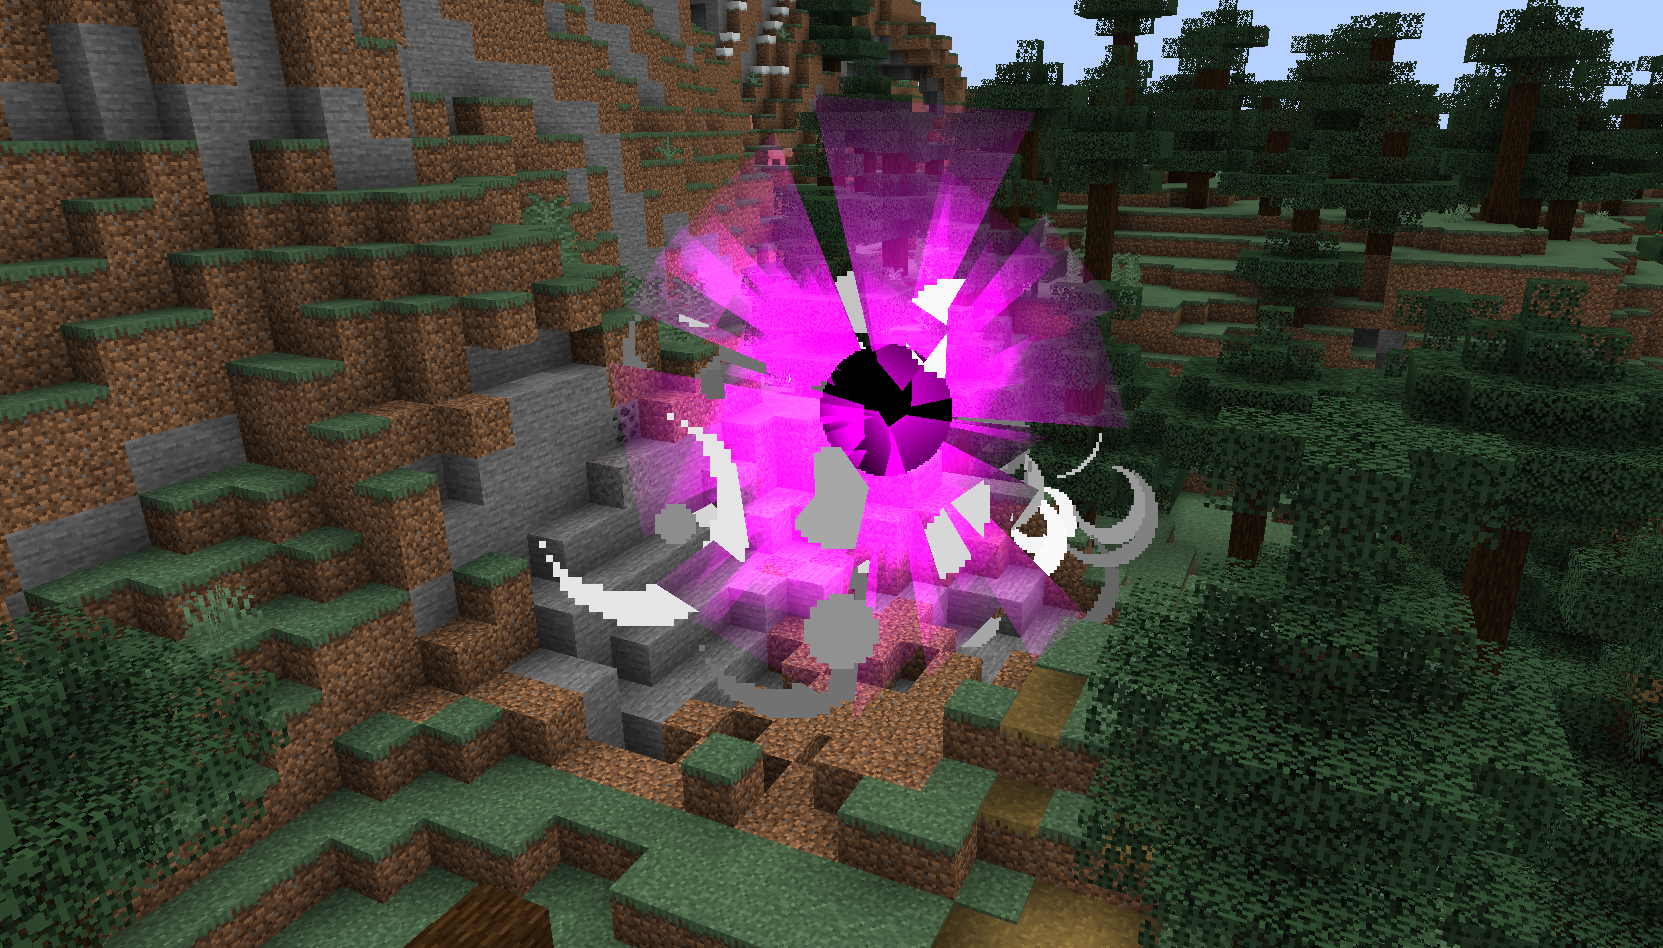 Blackhole becoming unstable and causing explosions around it dealing damage to blocks and mobs. (requires this feature to be turned on)